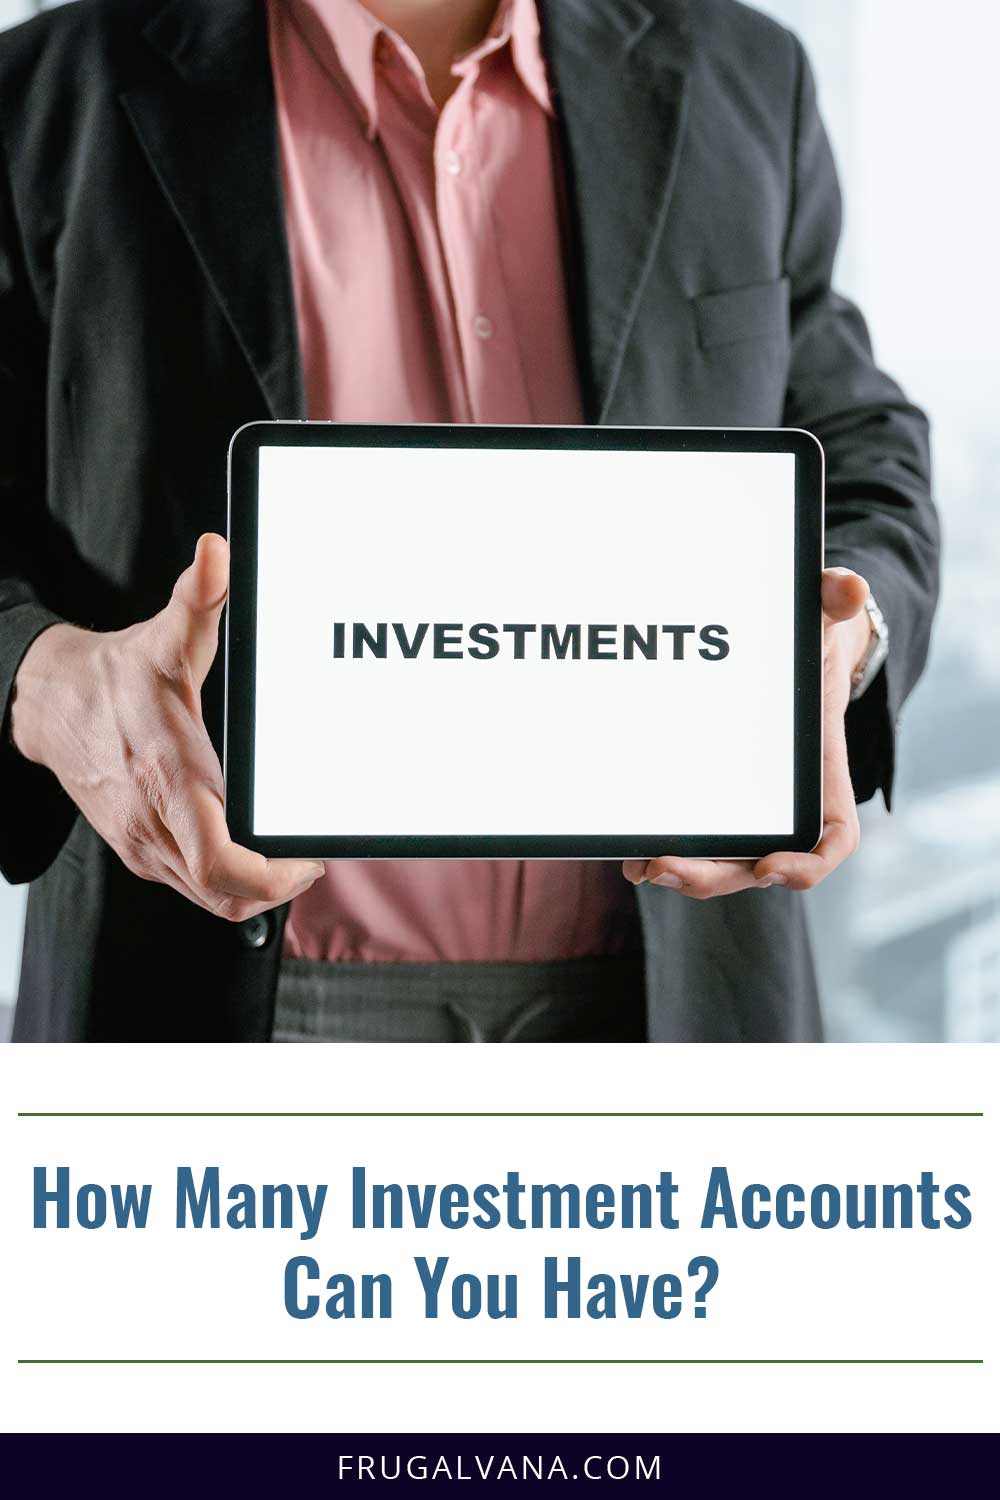 How Many Investment Accounts Can You Have?